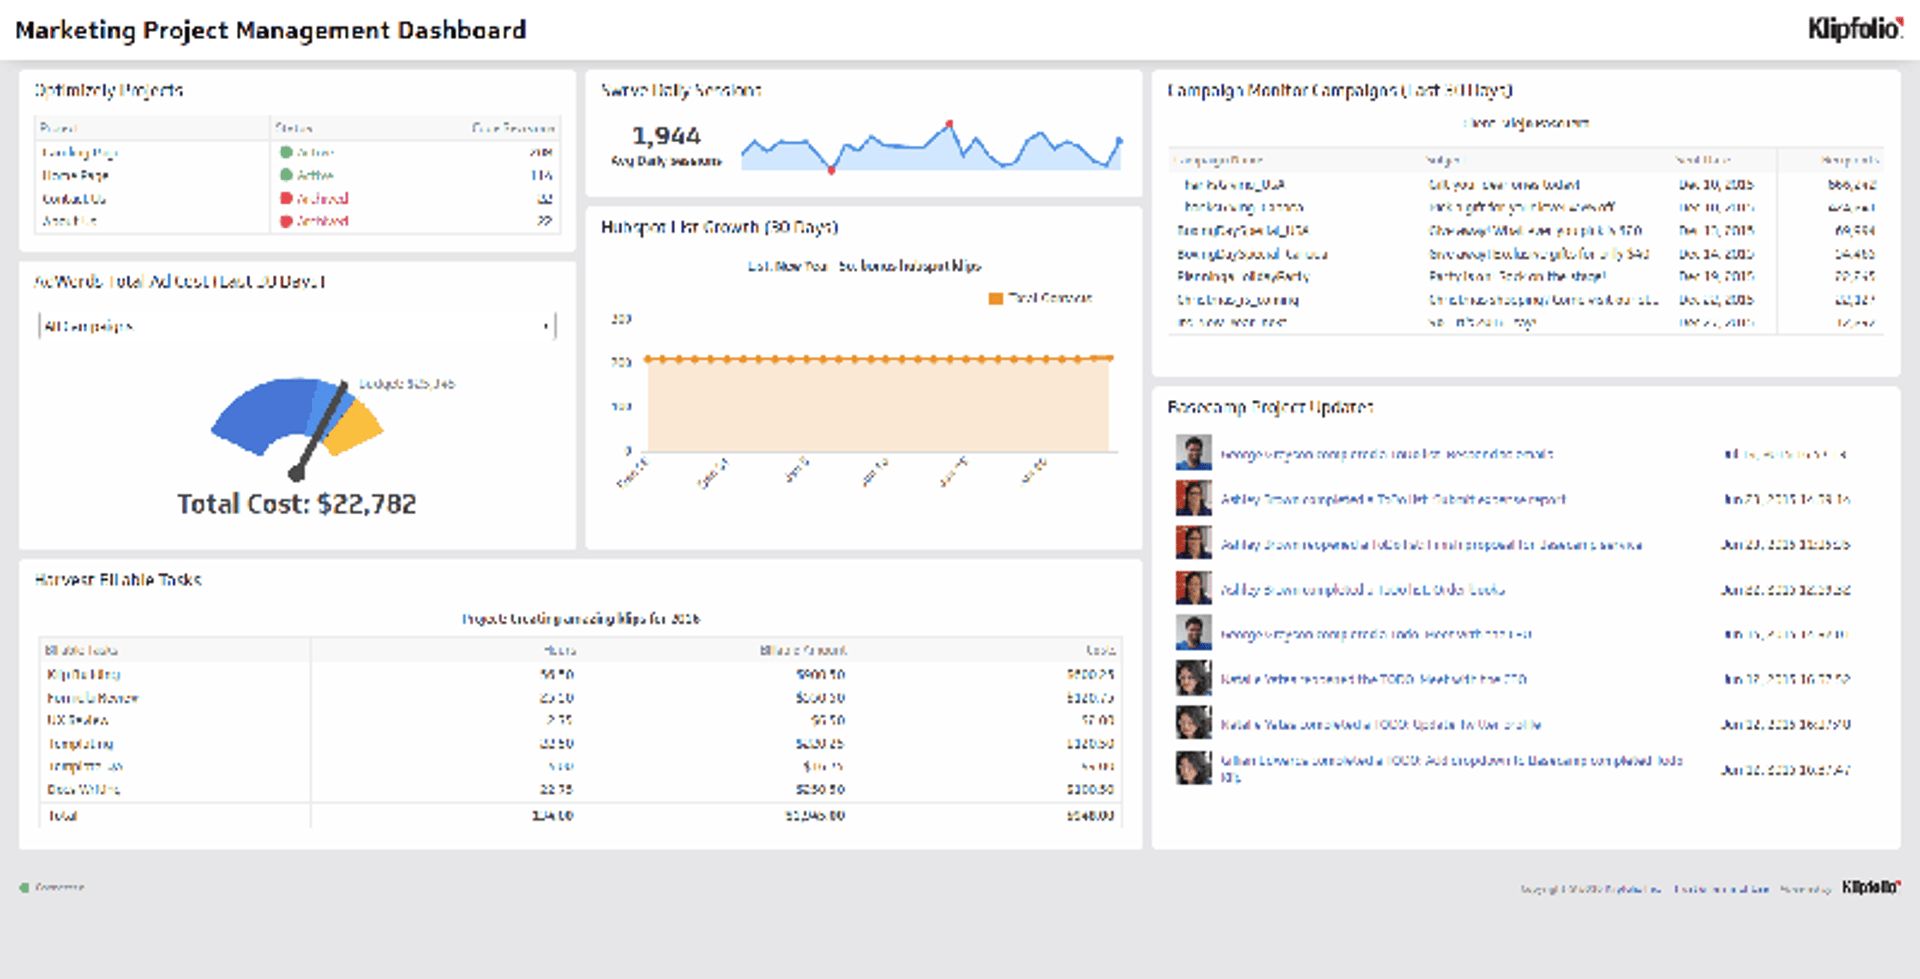 Project Management Dashboard 0